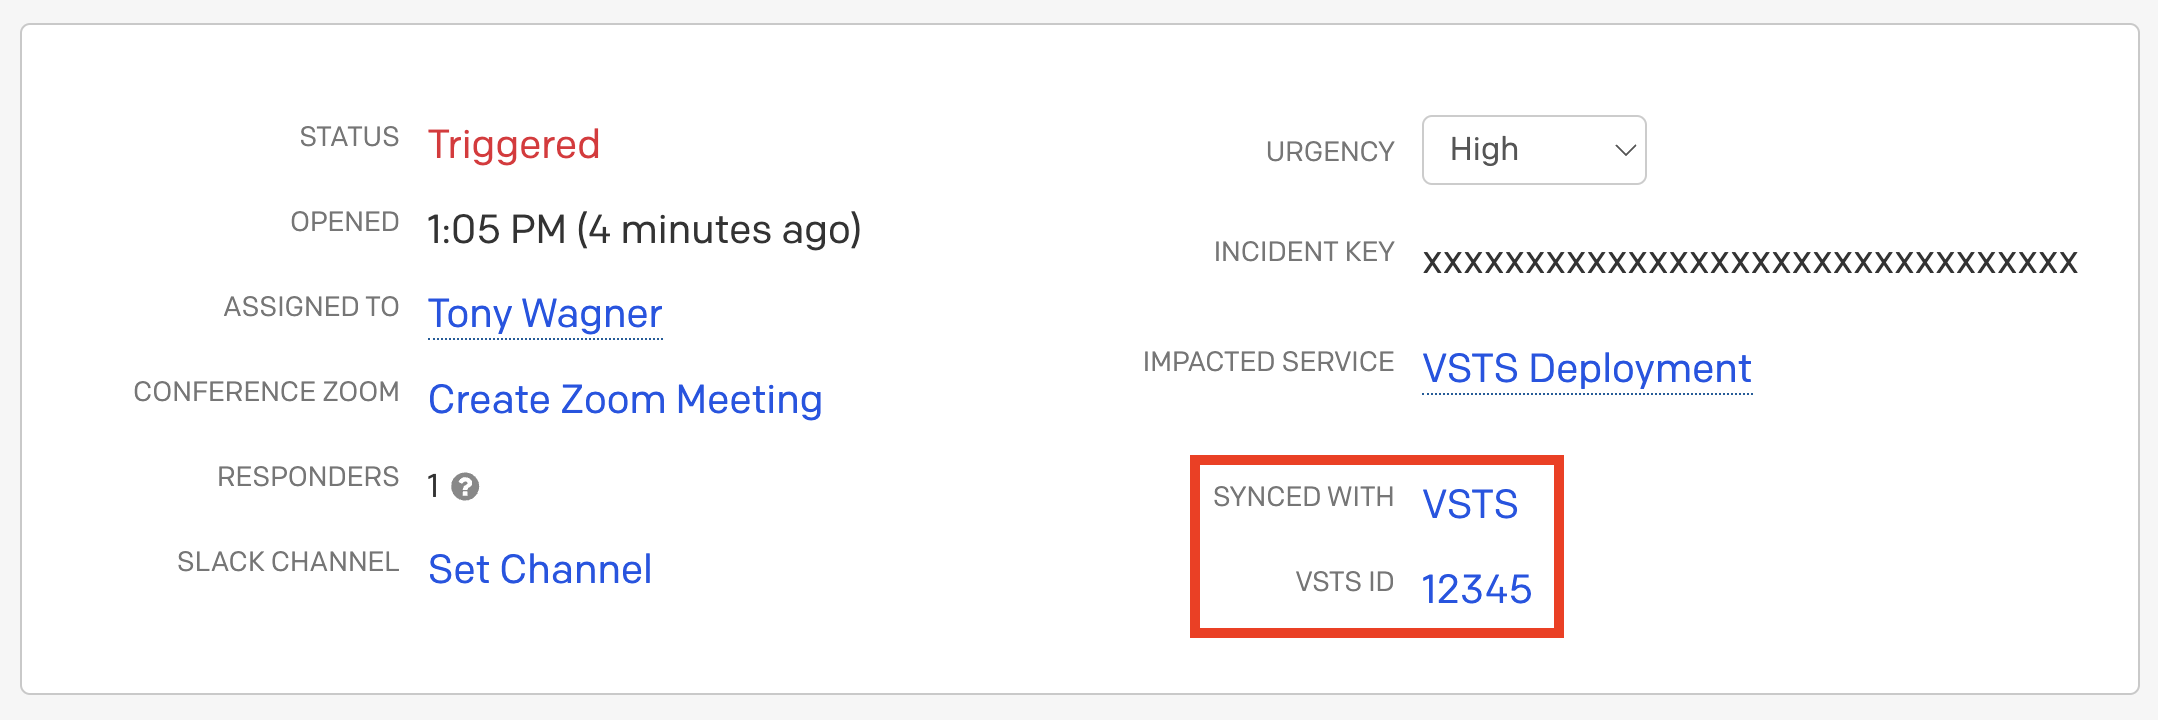 PagerDuty incident details